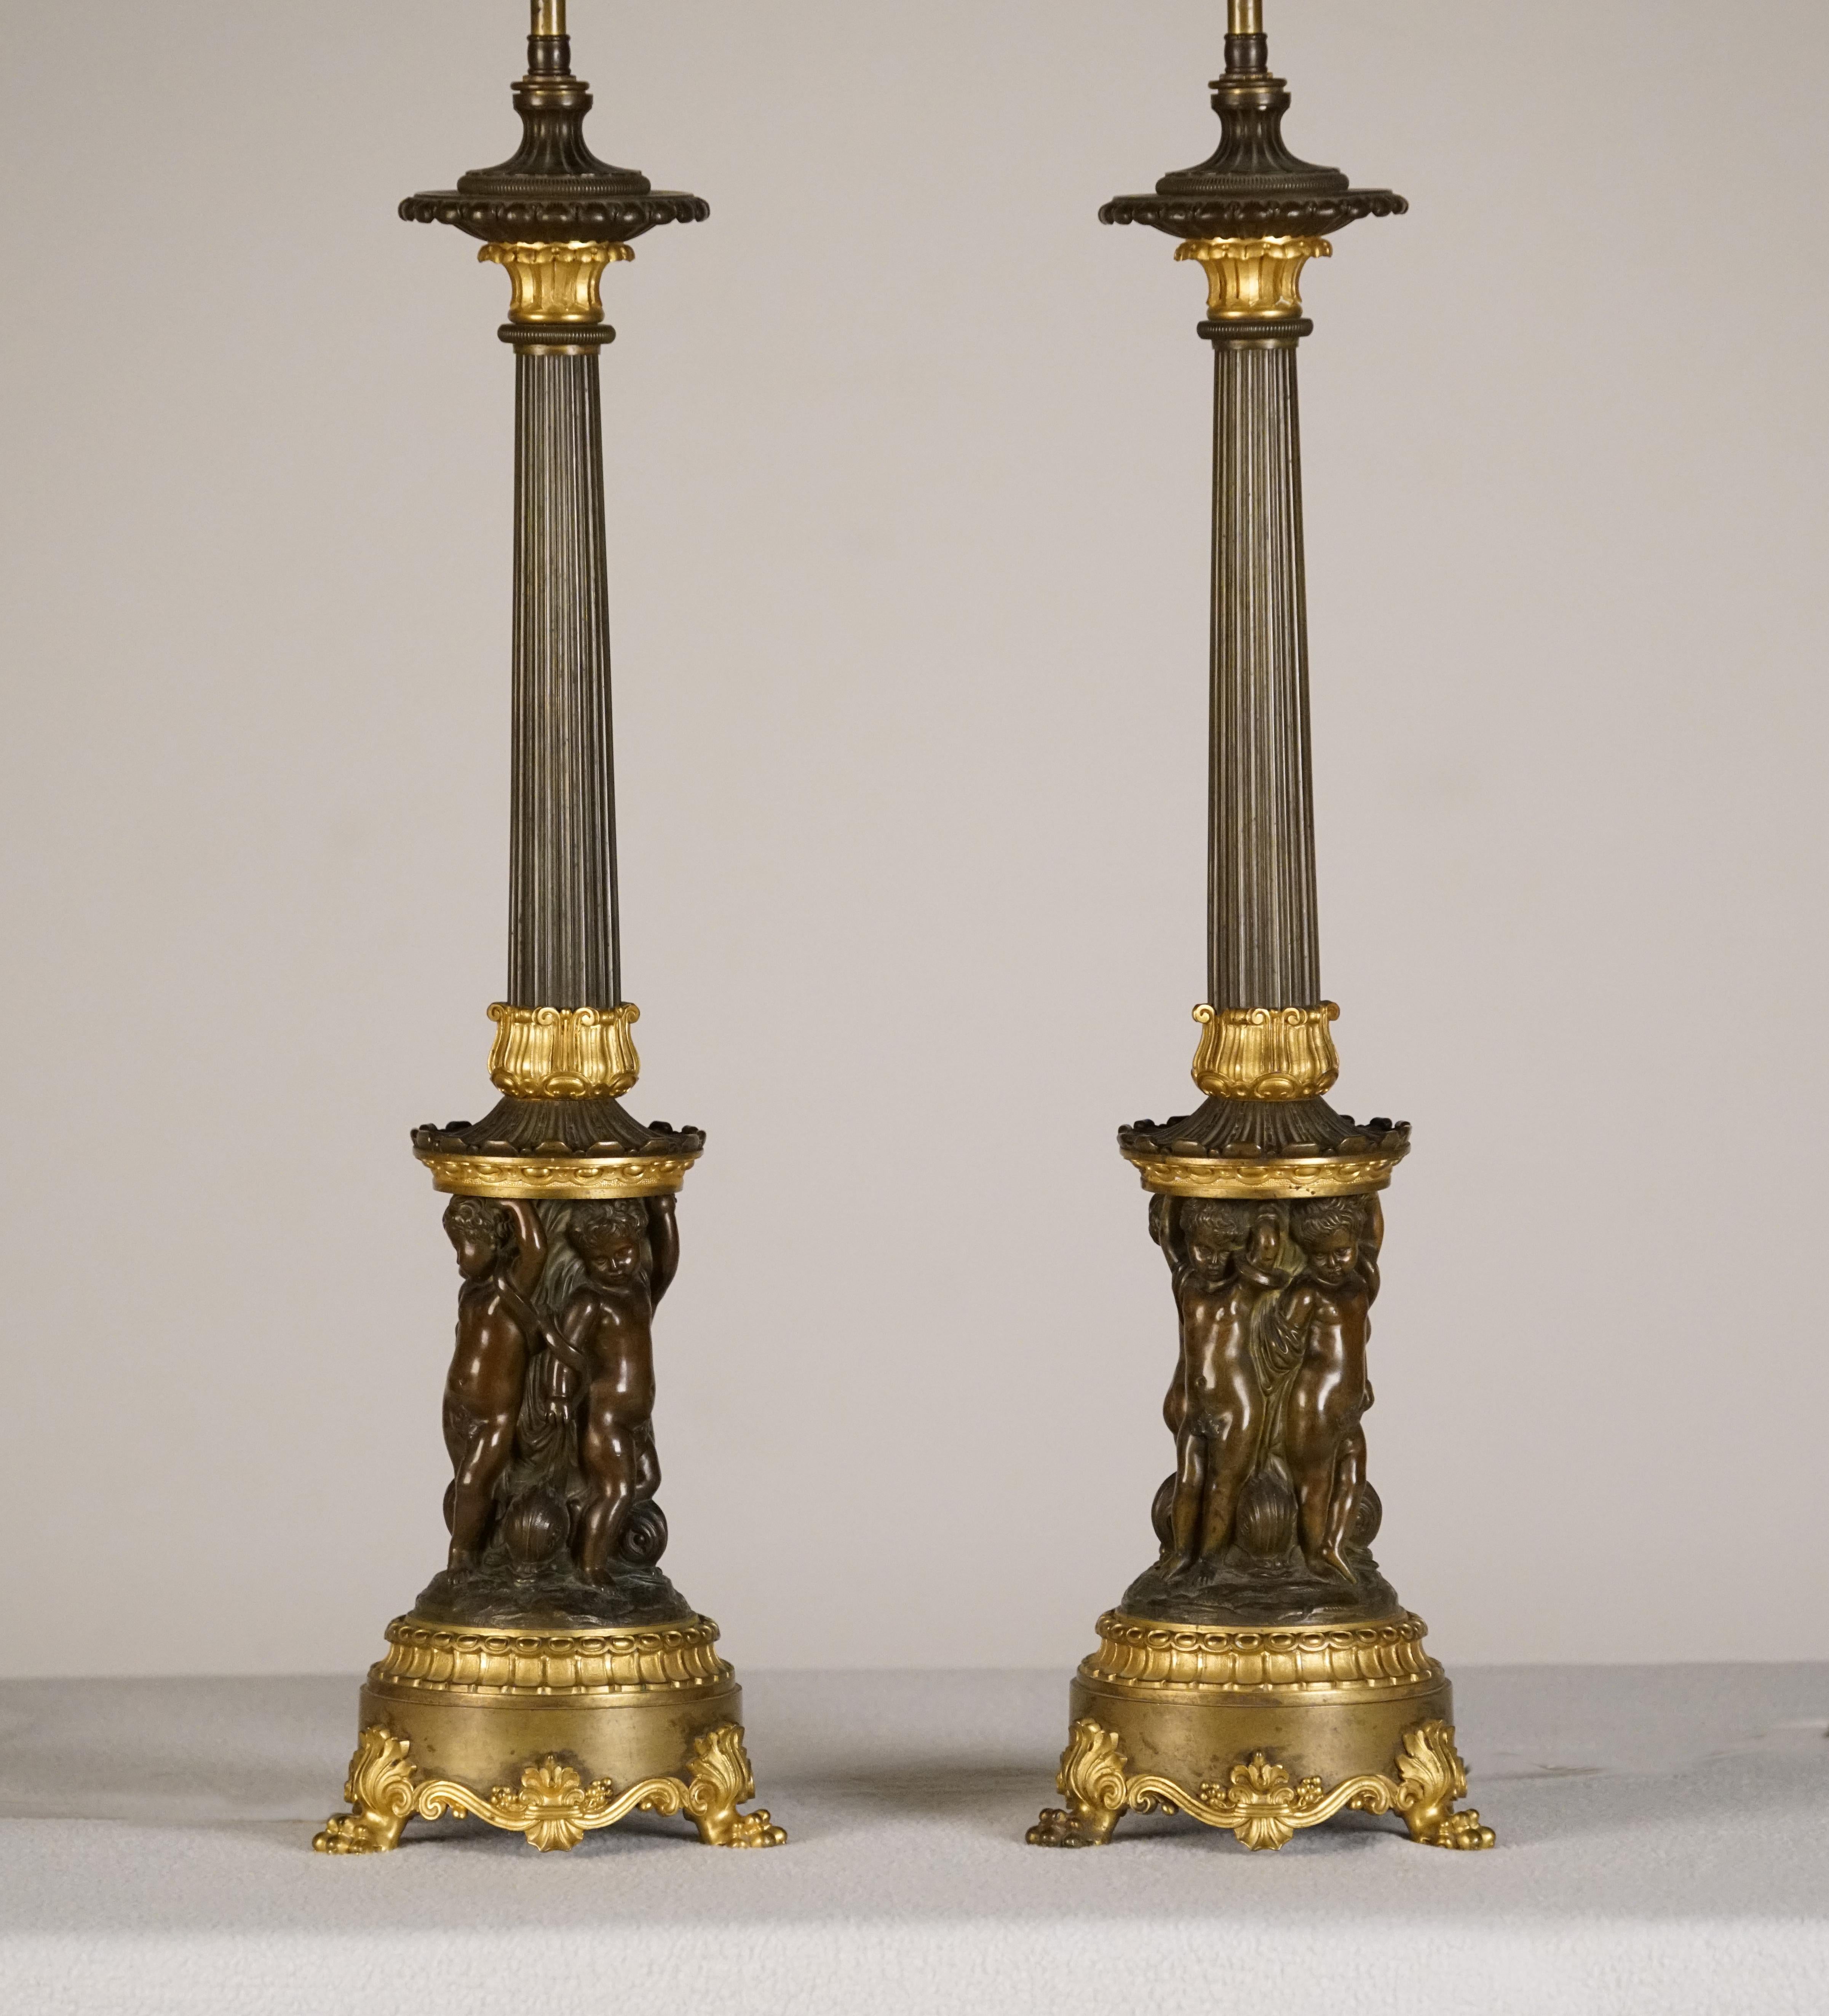 A fine pair of empire patinated & gilt bronze
Candelabre, mounted as lamps
1st quarter of the 19th century

Each reeded stem above drum base relief-cast with four putti on leaf-backed lion's paw feet.

Height 24 ½ in.
Lamp Height 36 ¼